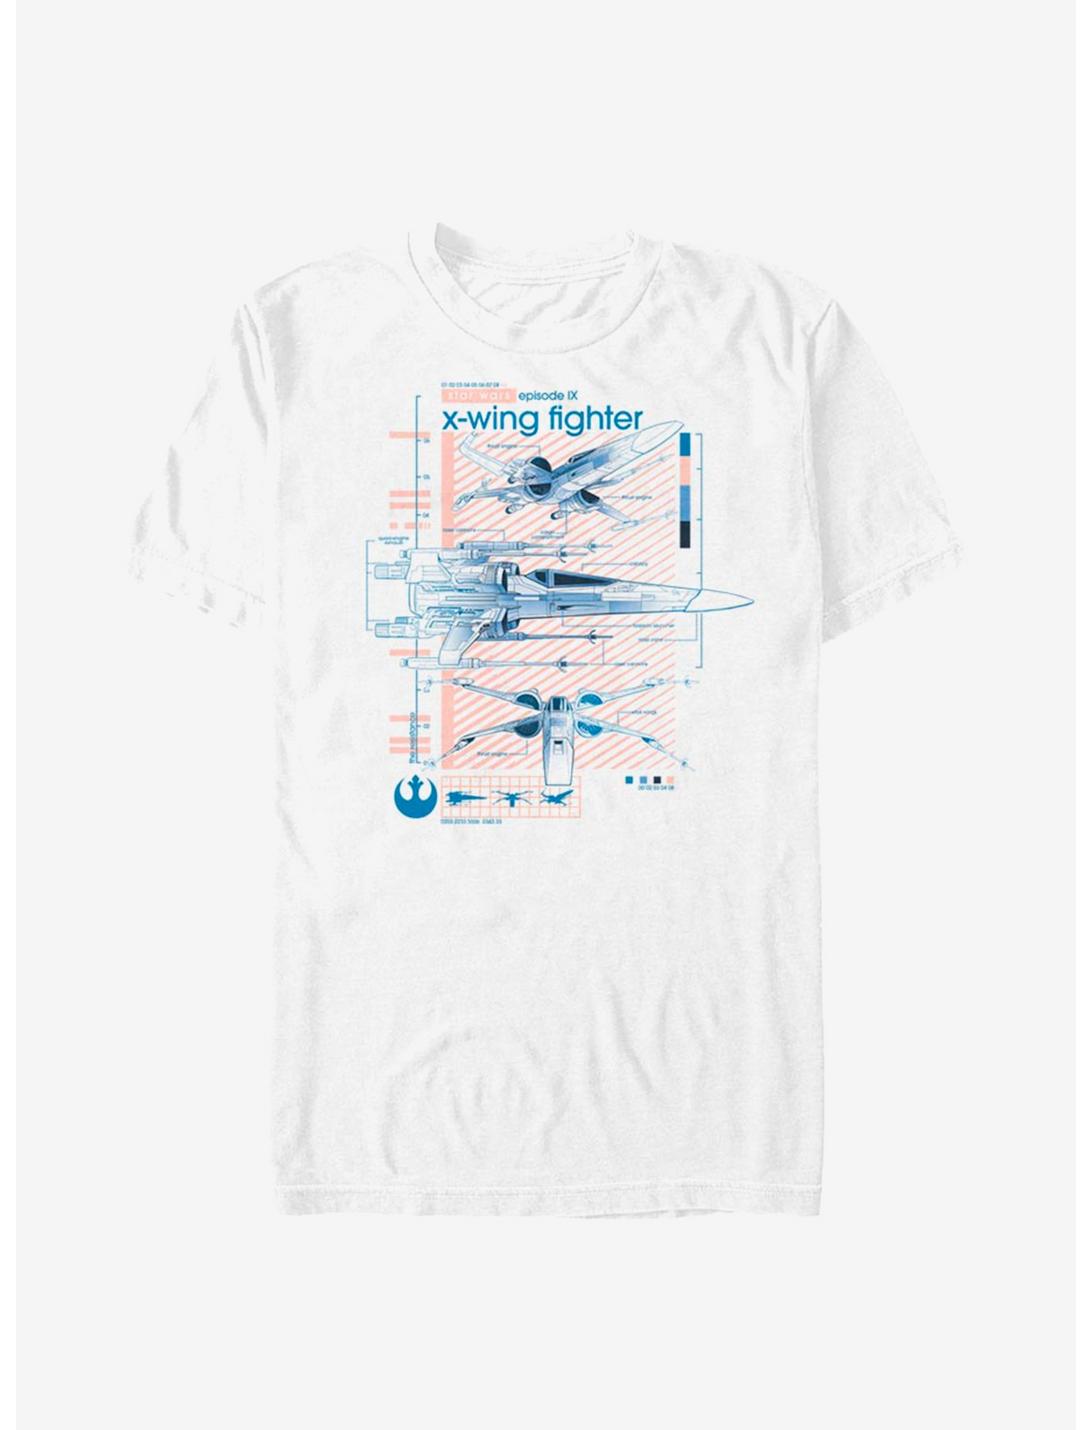 Star Wars Episode IX The Rise Of Skywalker X-Wing Fighter T-Shirt, WHITE, hi-res